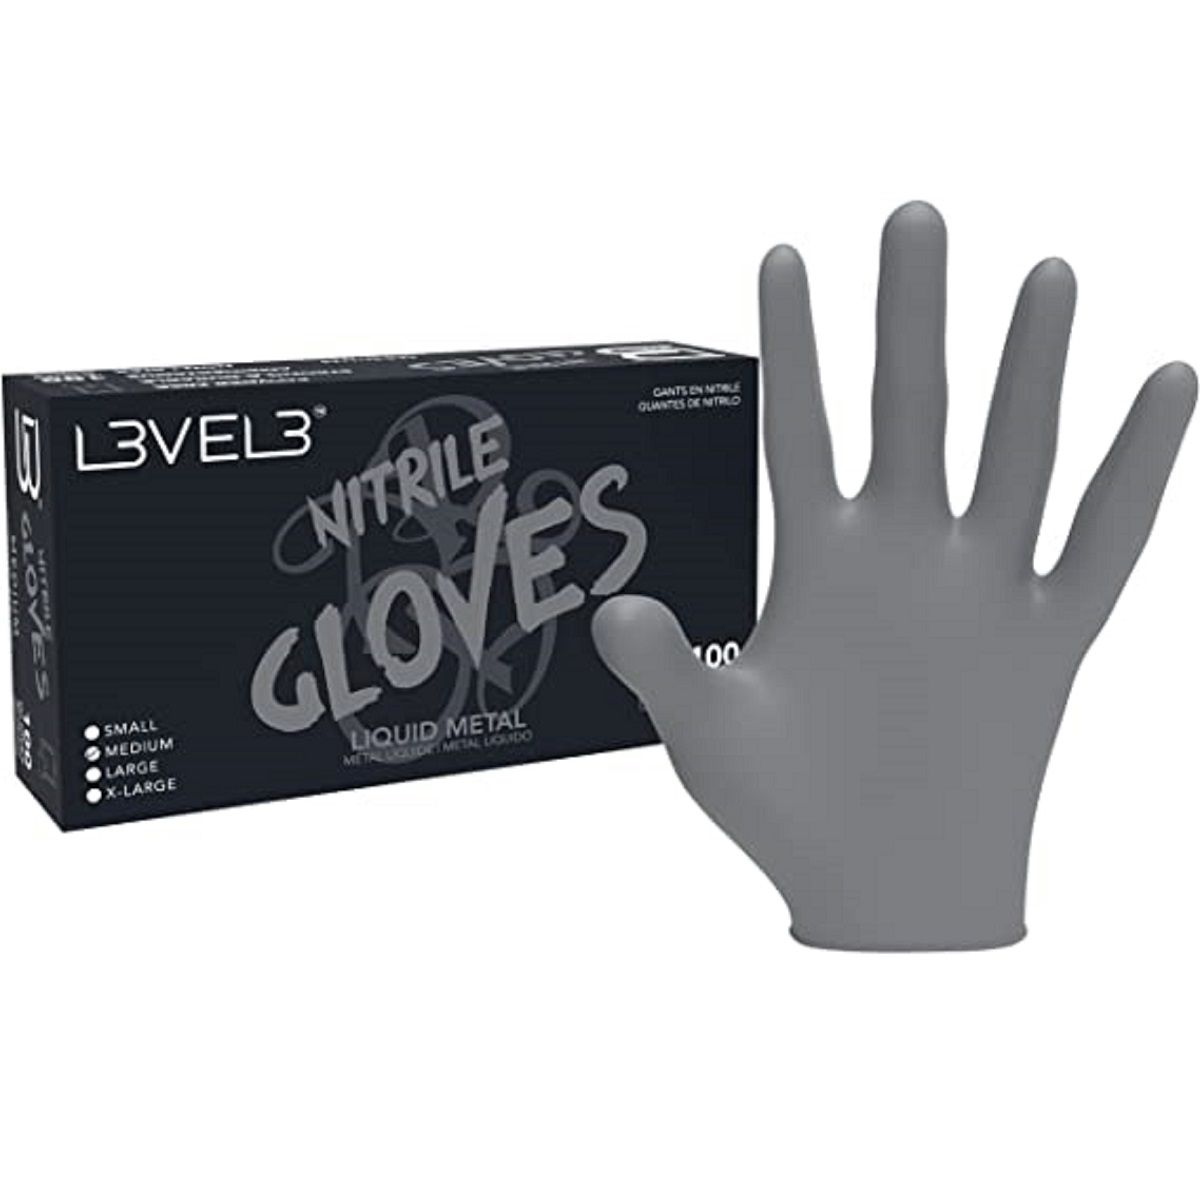 2 x L3VEL3 Styling Powder Dust /Texturizing/Matte Look/Hold Level